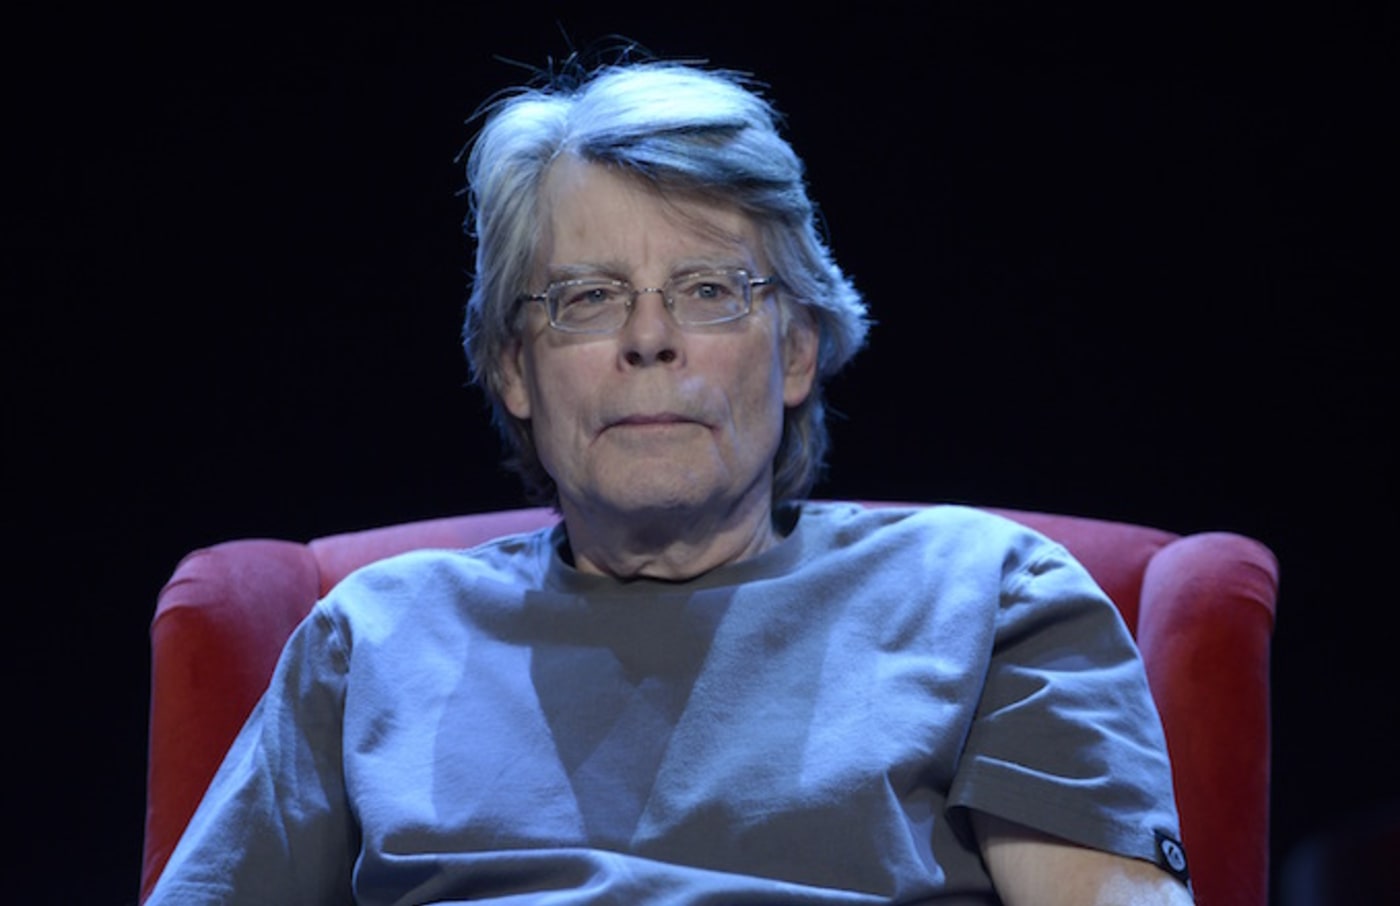 Stephen King poses during a portrait session in Paris, France.